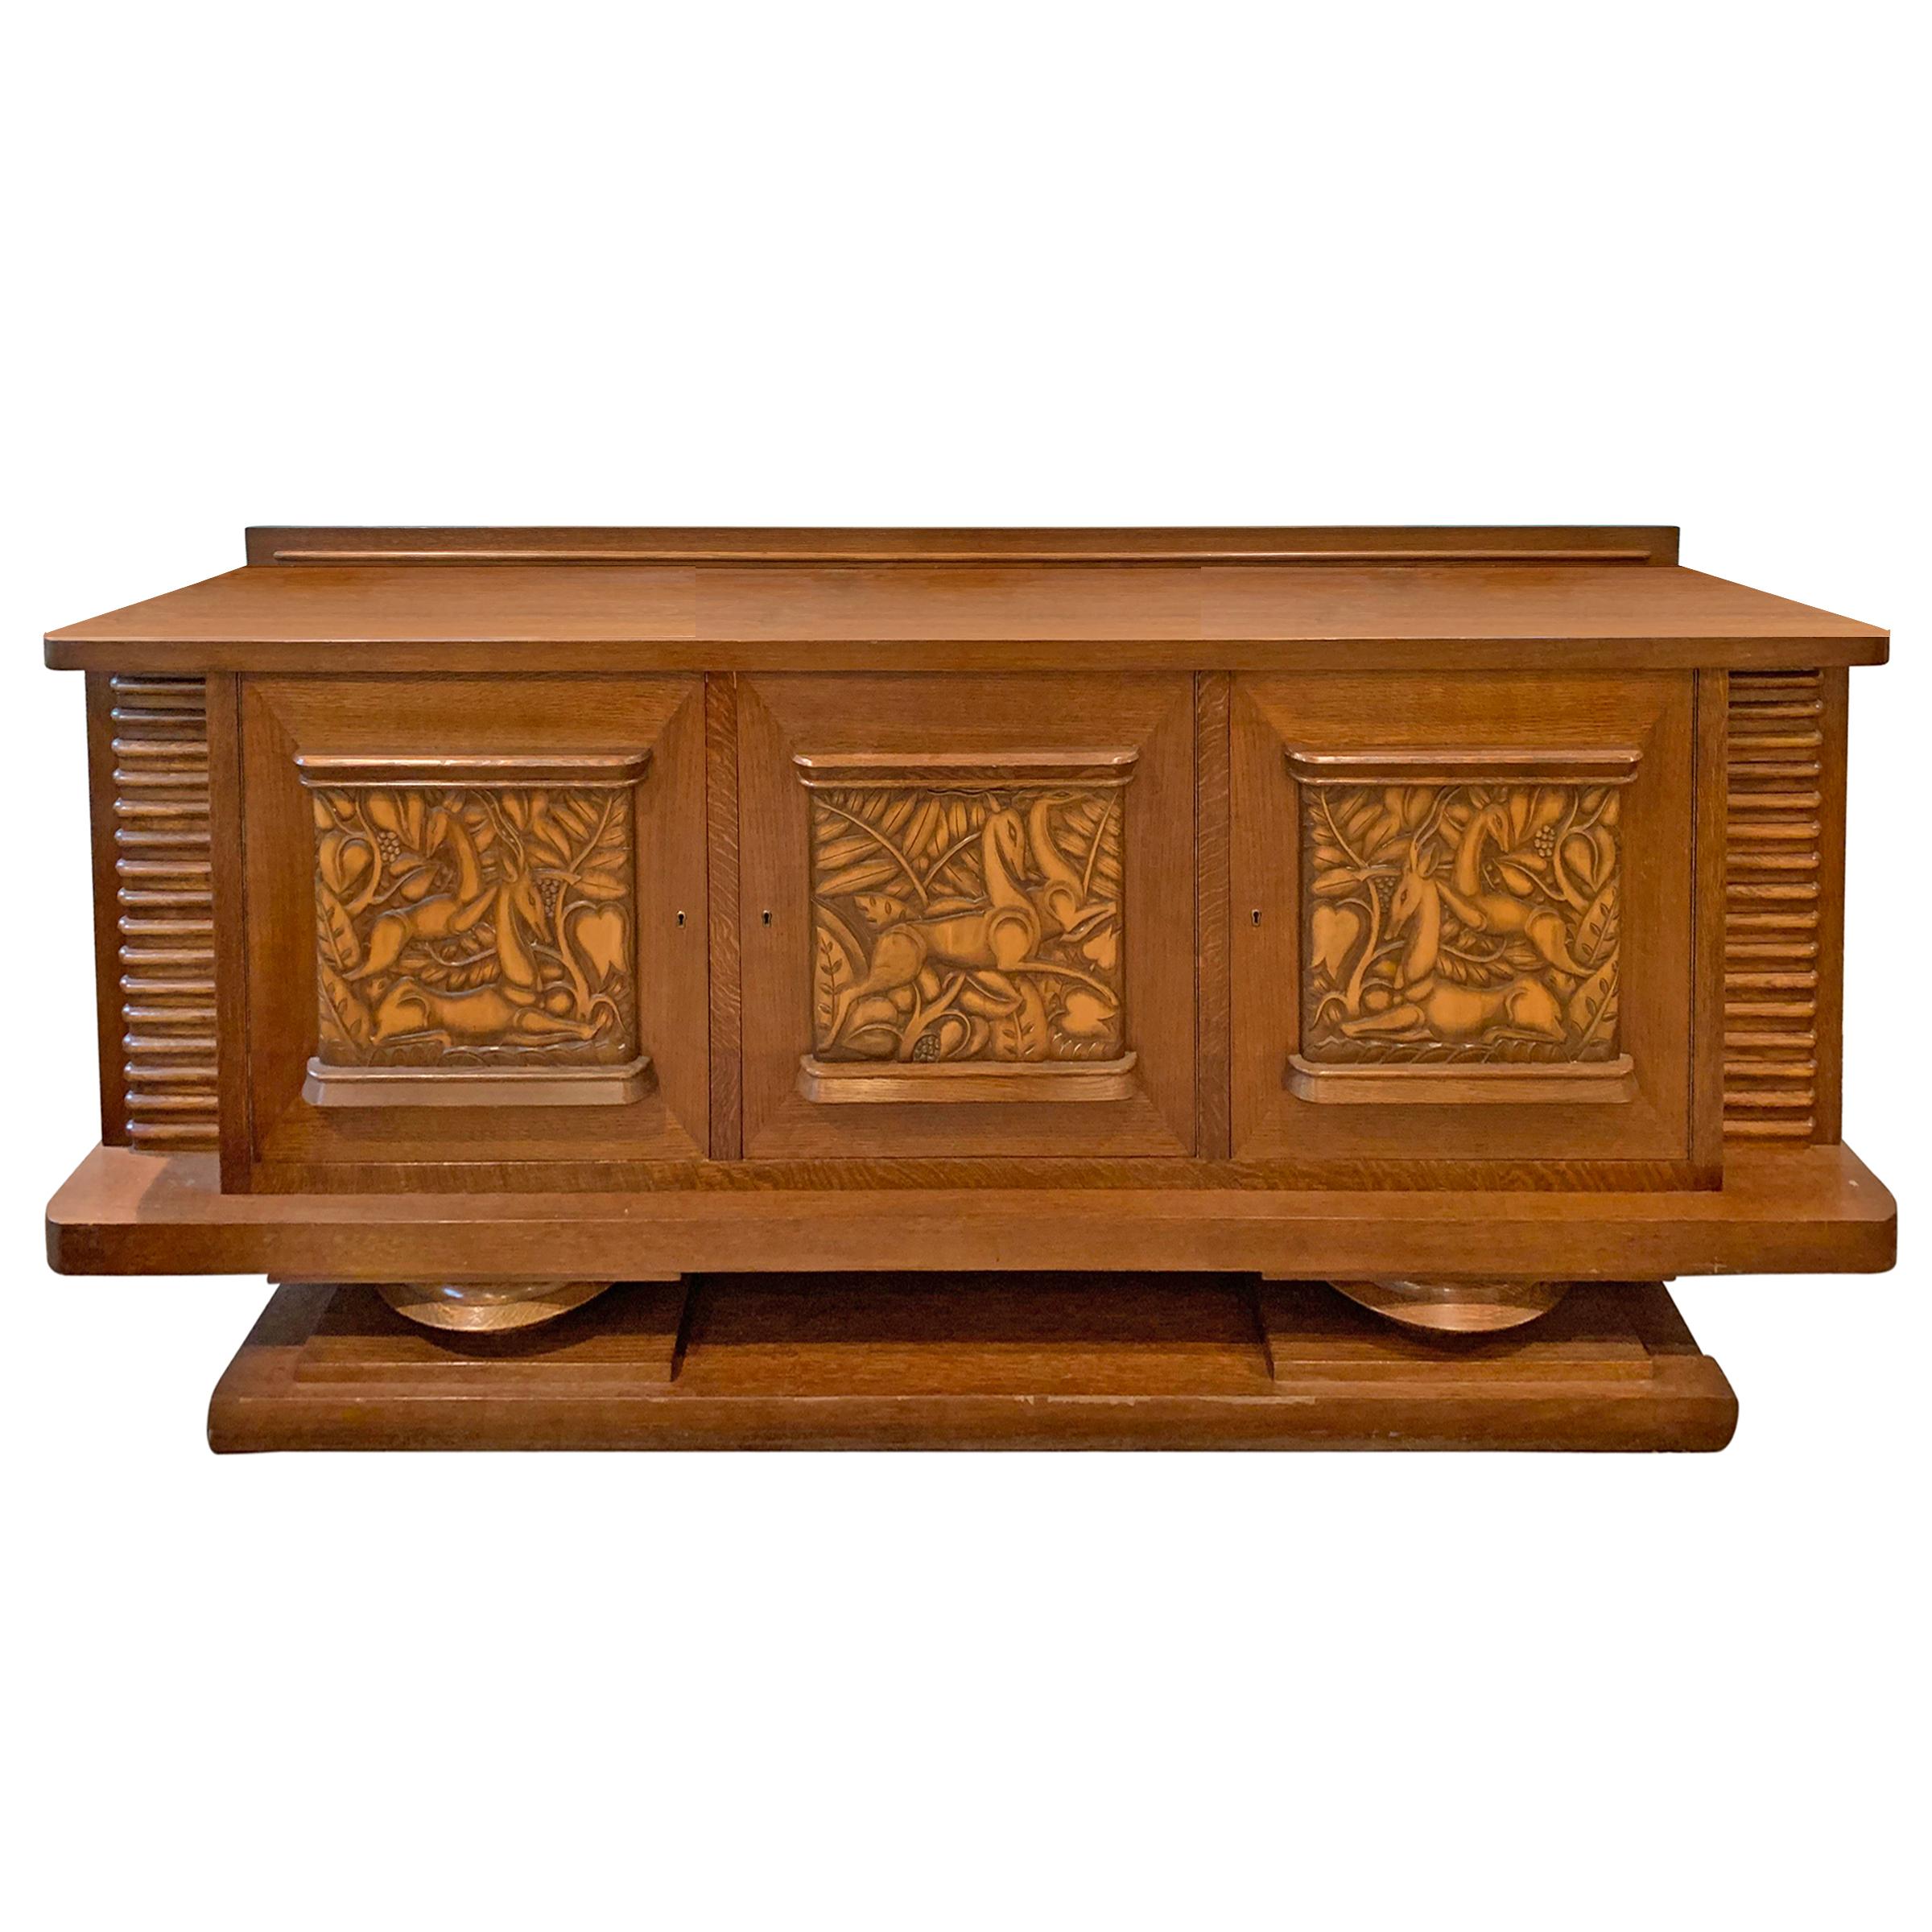 An incredible early 20th century Danish Art Deco oak cabinet with three doors, each with a classic Art Deco low relief carved antelope and palm leaf panel, large interior storage spaces, and two drawers. The entire piece rests on two wide bun feet